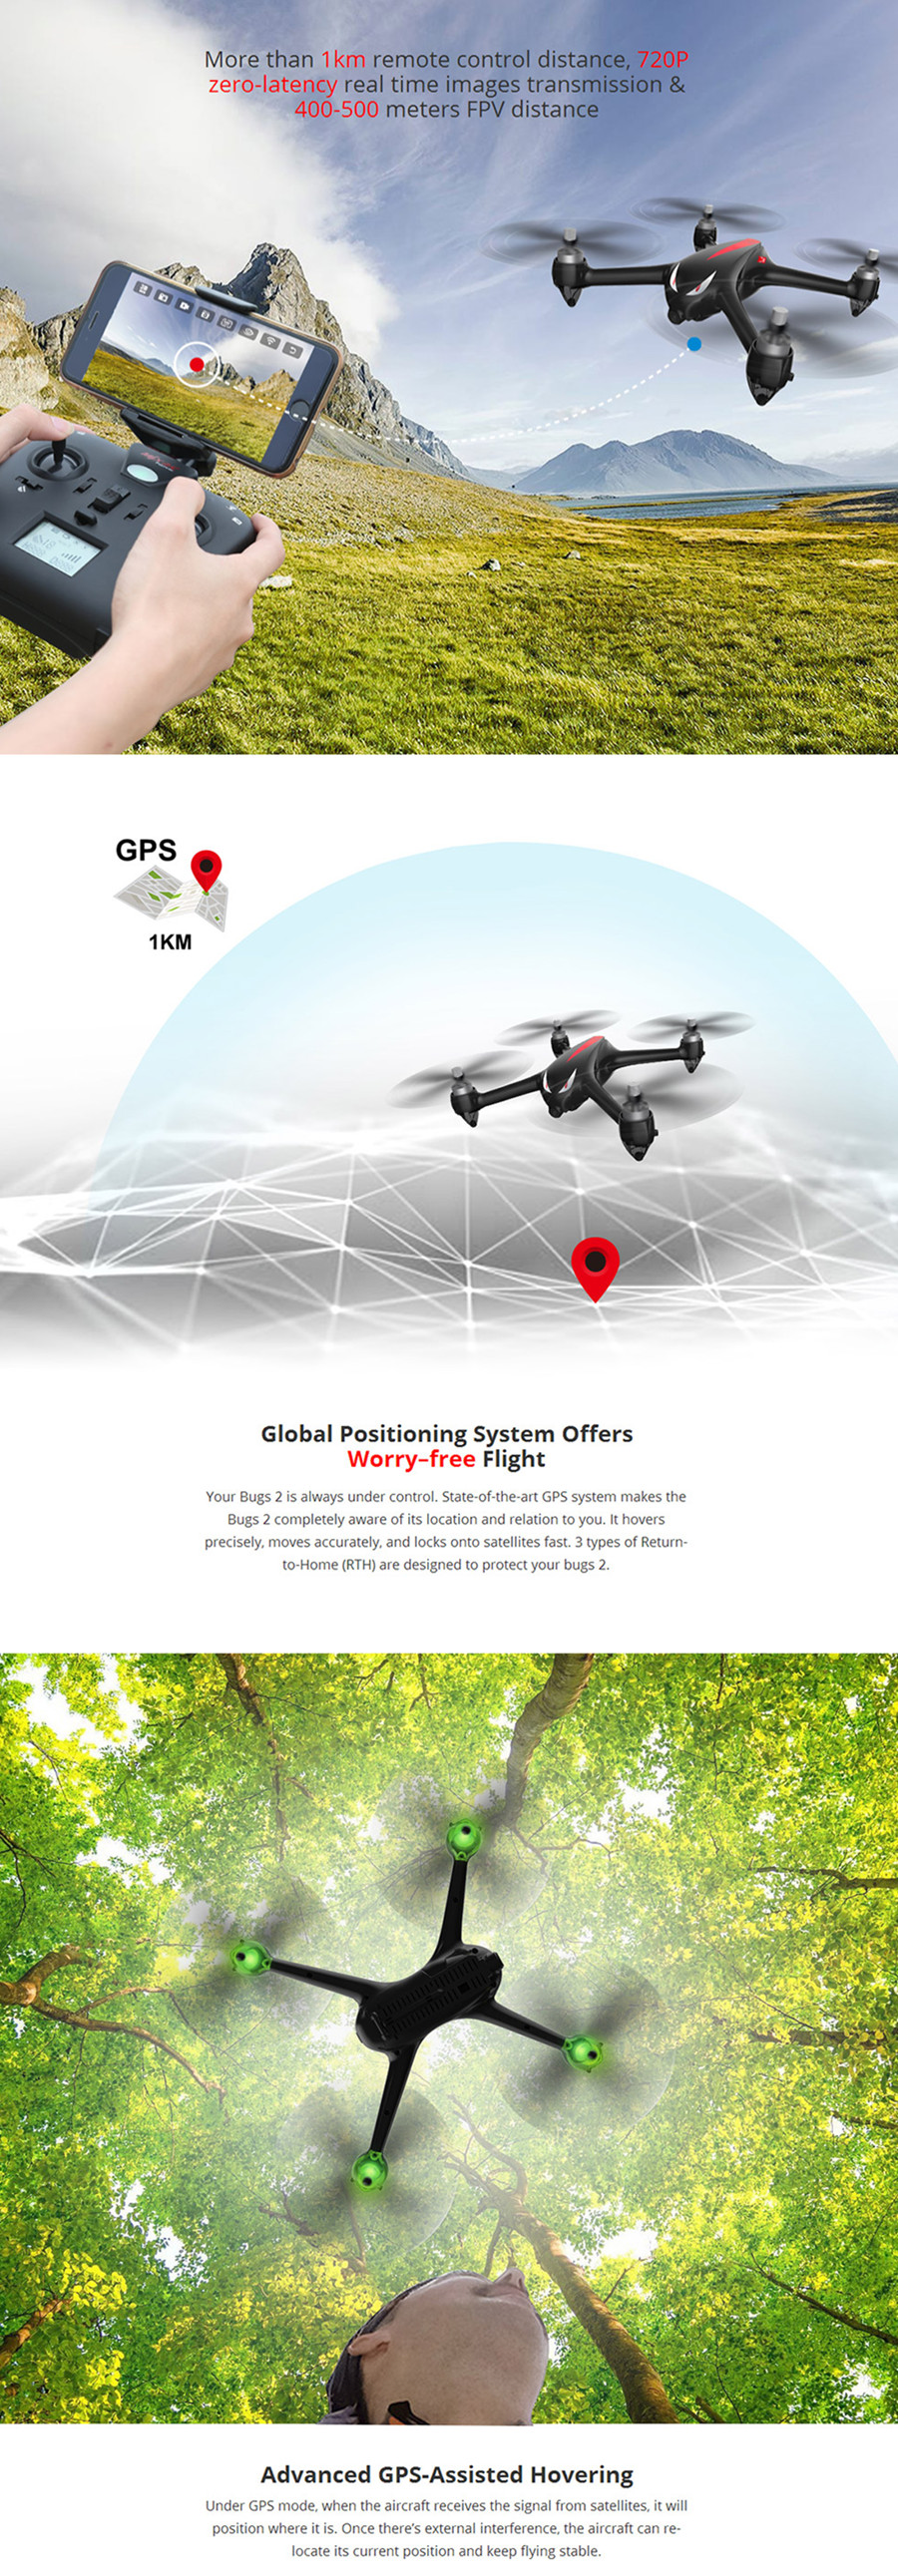 MJX B2W Bugs 2W Monster Brushless 5G WiFi FPV With 1080P HD Camera GPS RC Quadcopter RTF - Photo: 2